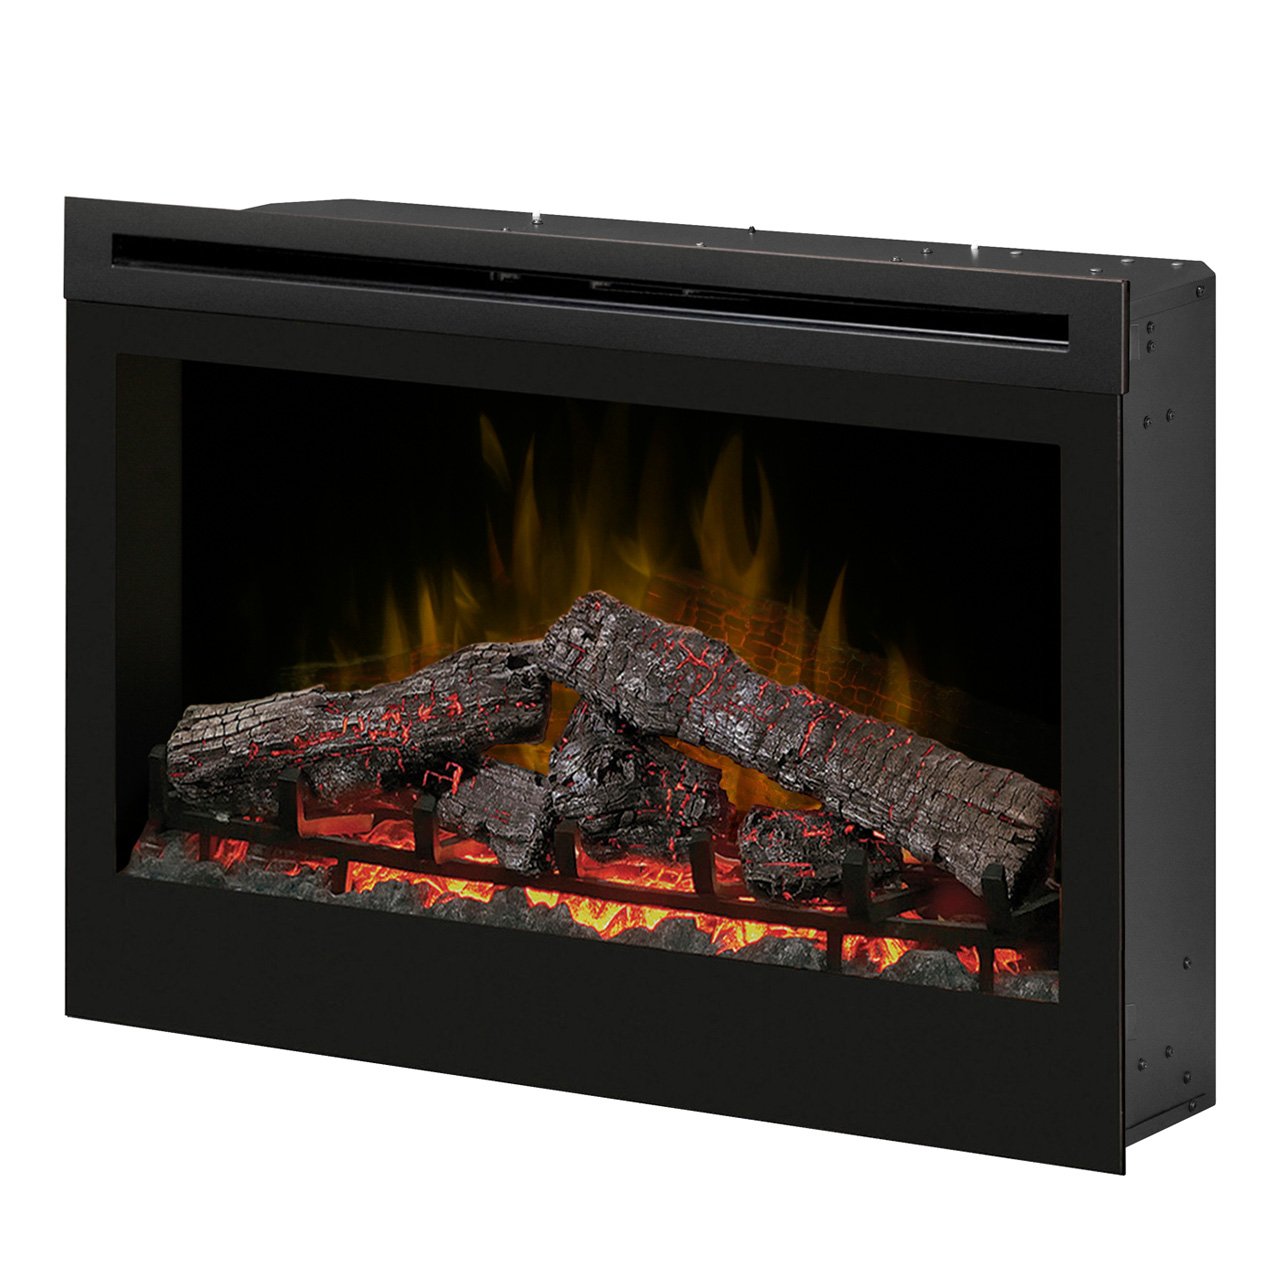 Fireplace Manufacturers New Dimplex Df3033st 33 Inch Self Trimming Electric Fireplace Insert